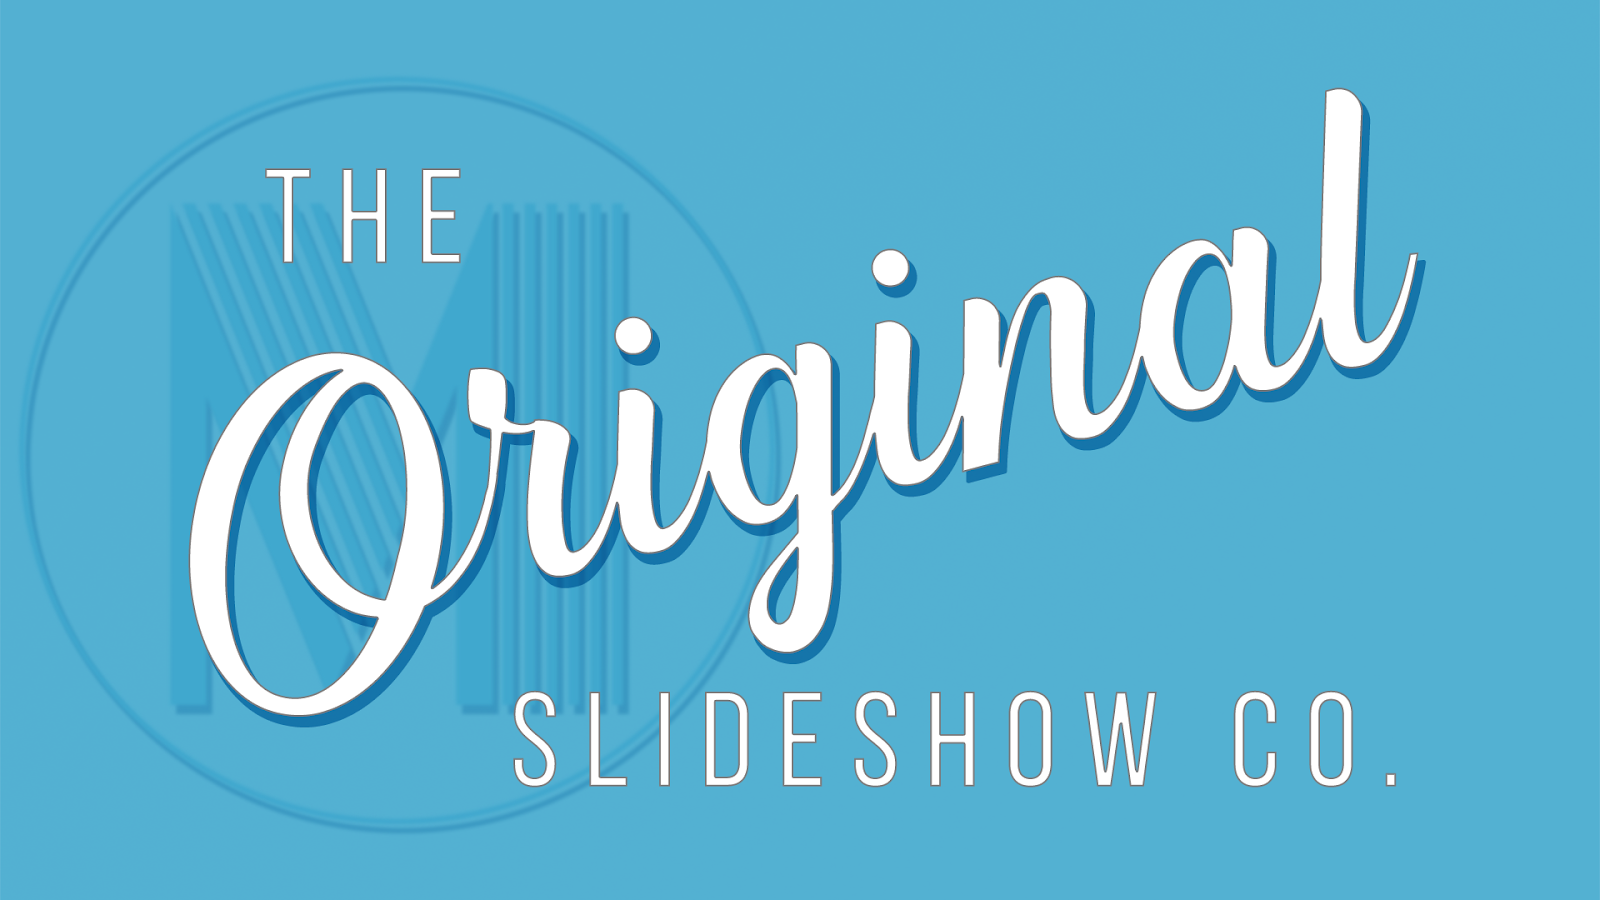 How to make the best slideshow | Step by step guide for creating the best Milestone Slideshows